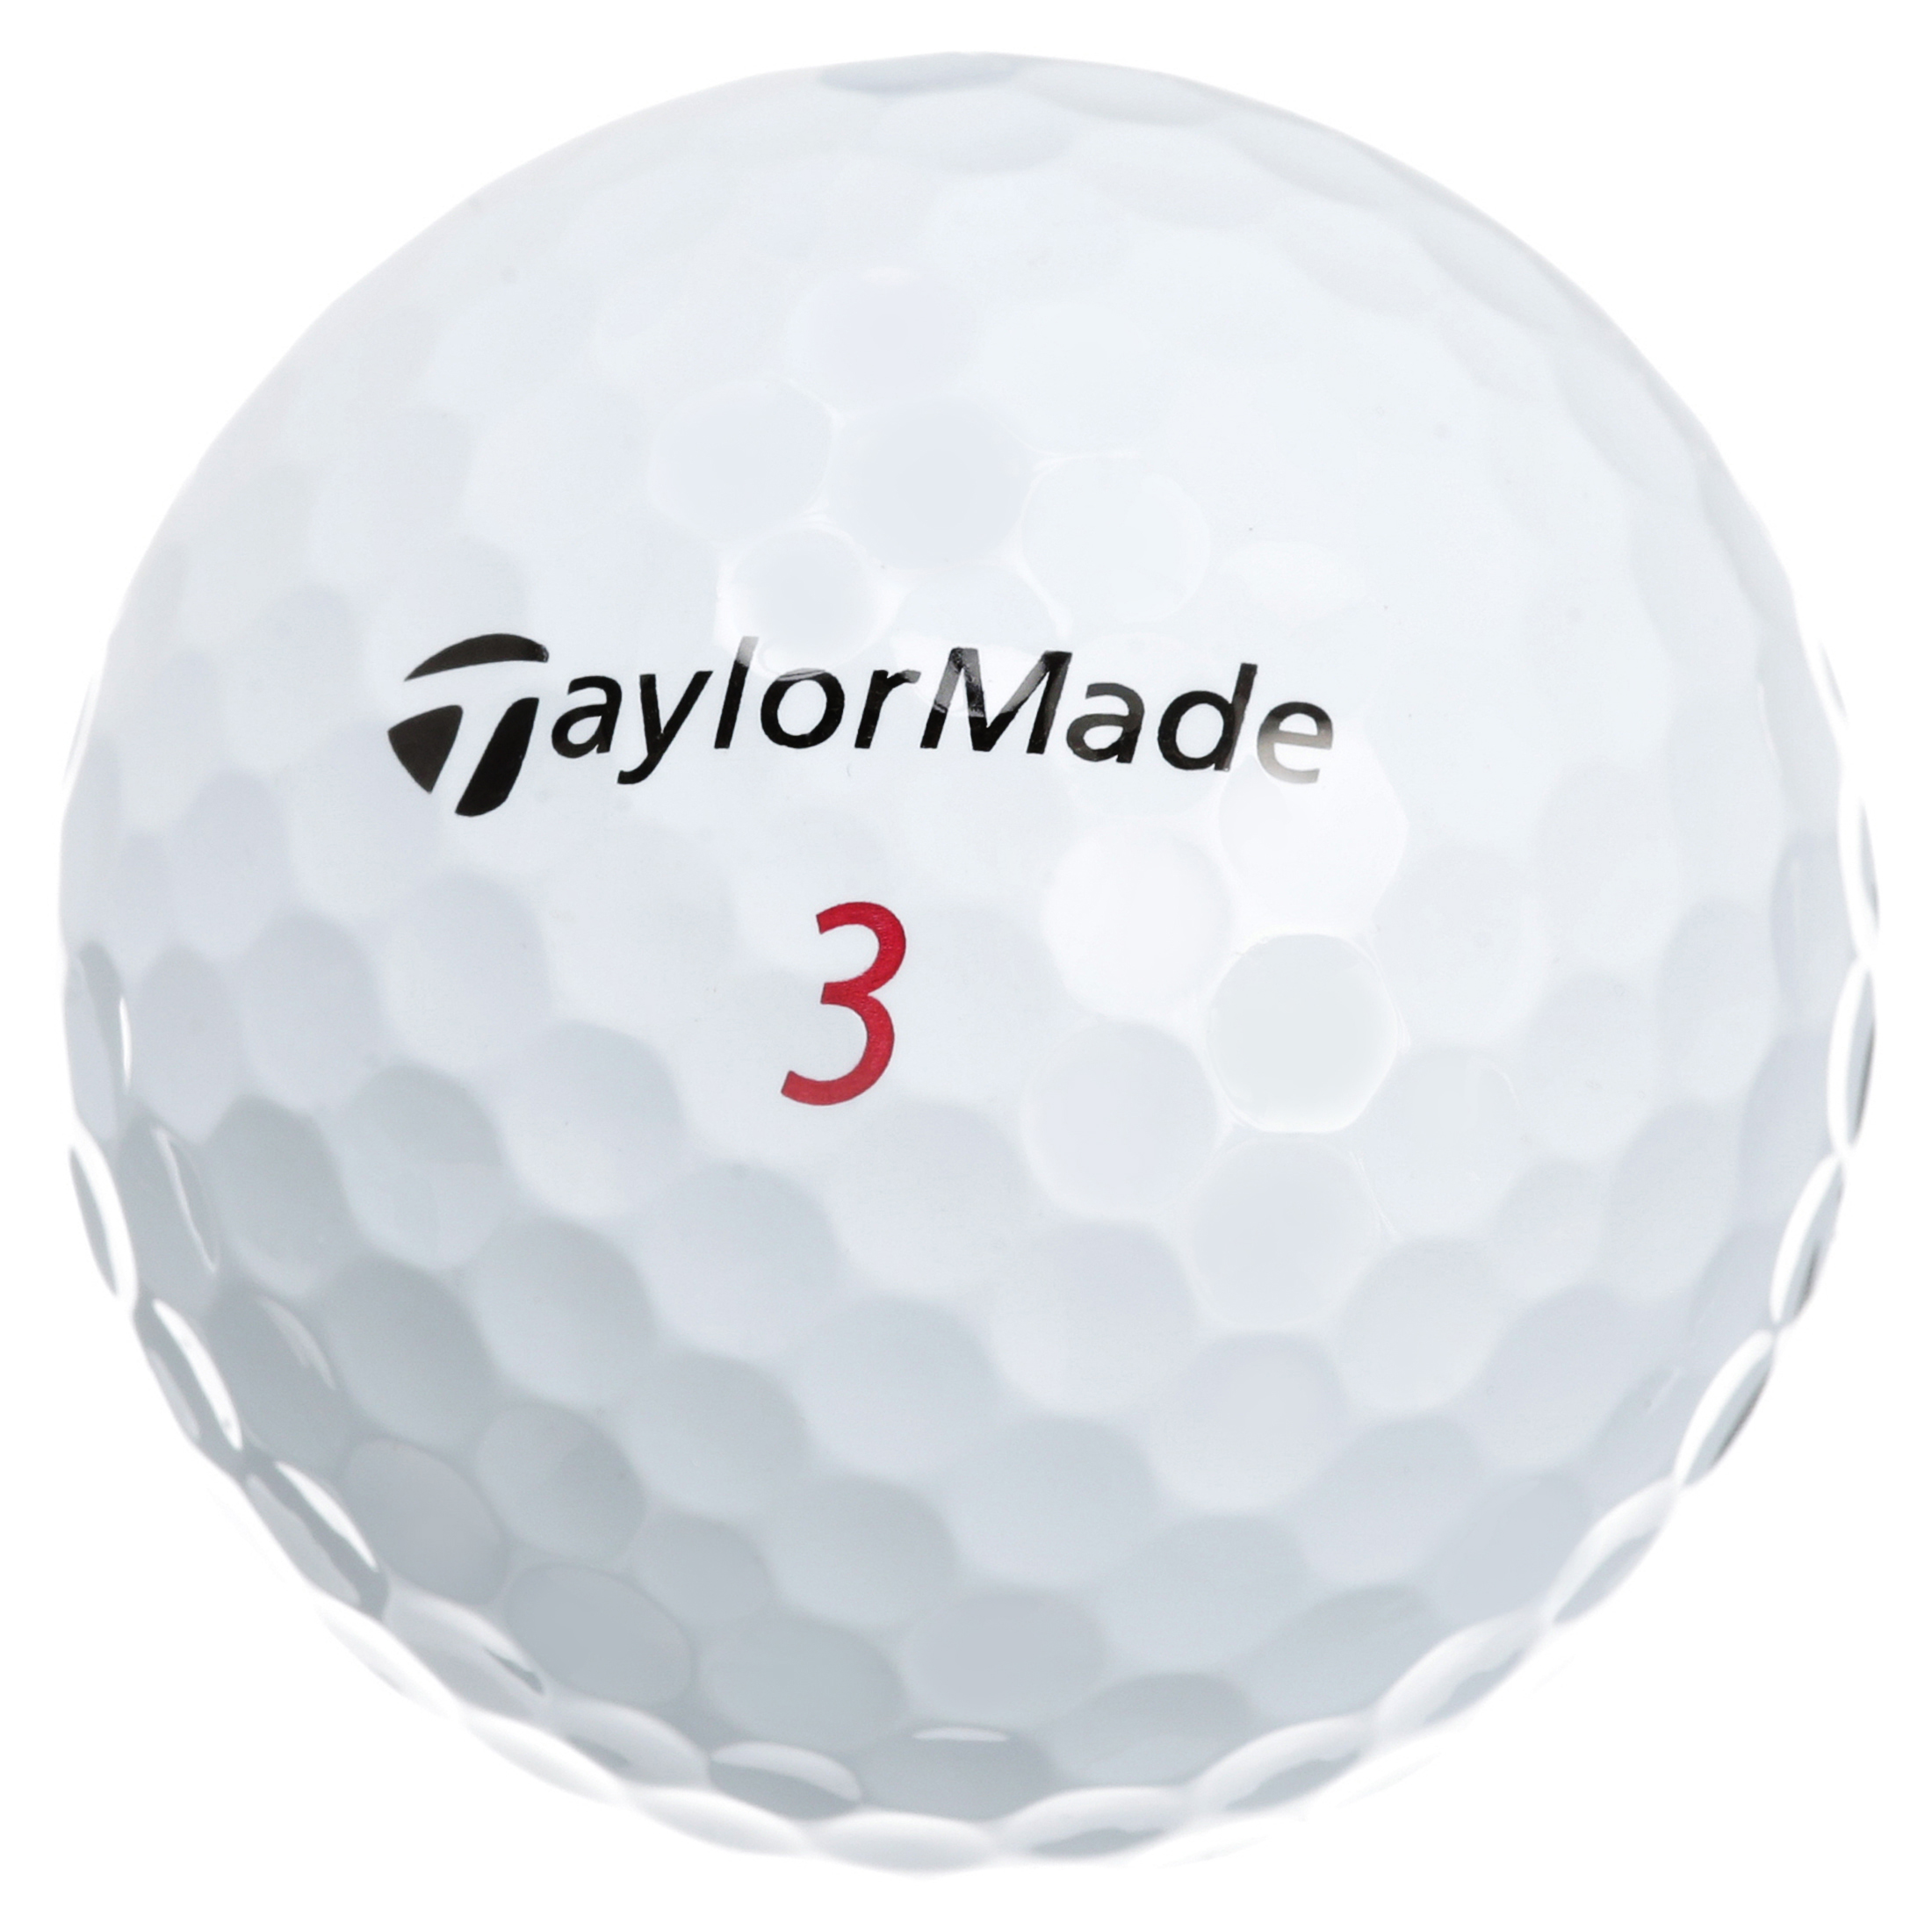 TaylorMade TP5x Golf Balls, 12 Pack - image 6 of 7